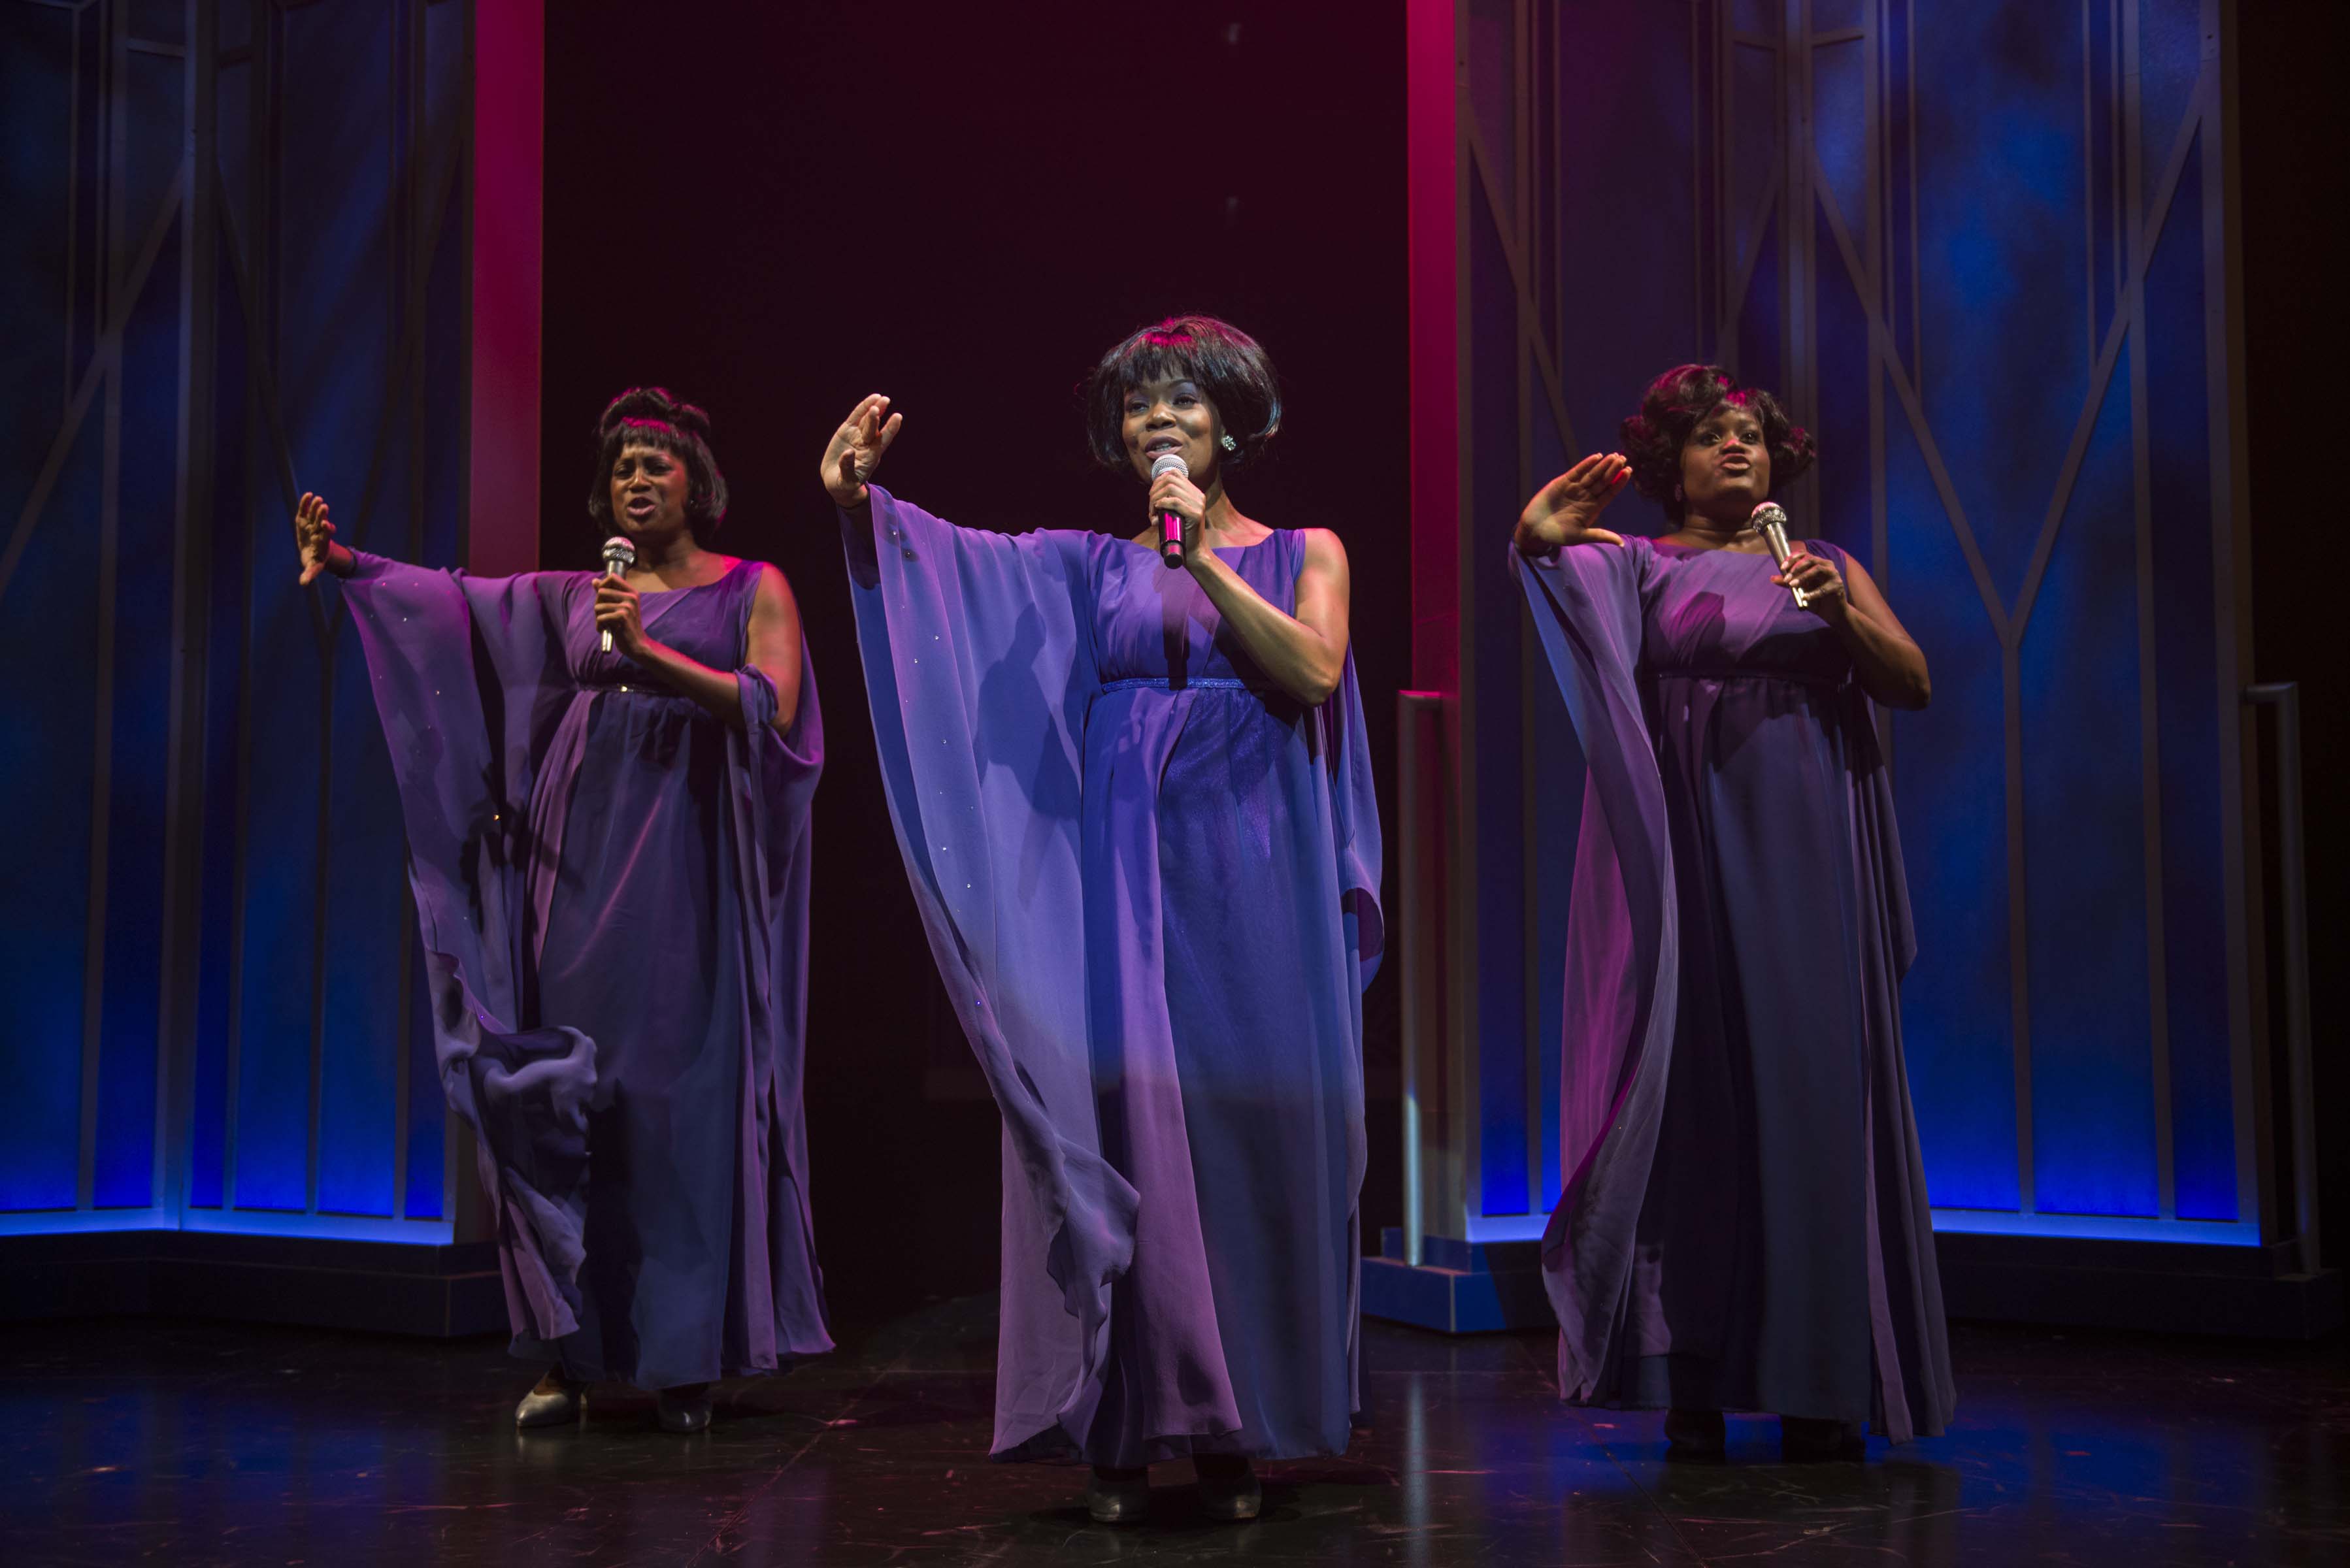 Milwaukee Rep Delivers An Electrifying DREAMGIRLS 6 Skylight Music Theatre opens its 2016-17 season with the Milwaukee premiere of the award-winning musical Violet. Featuring a score by acclaimed composer Jeanine Tesori and book and lyrics by Brian Crawley, this powerful and tender musical runs Friday, September 30 through Sunday, October 16, 2016, in the Cabot Theatre at the Broadway Theatre Center (158 N. Broadway).